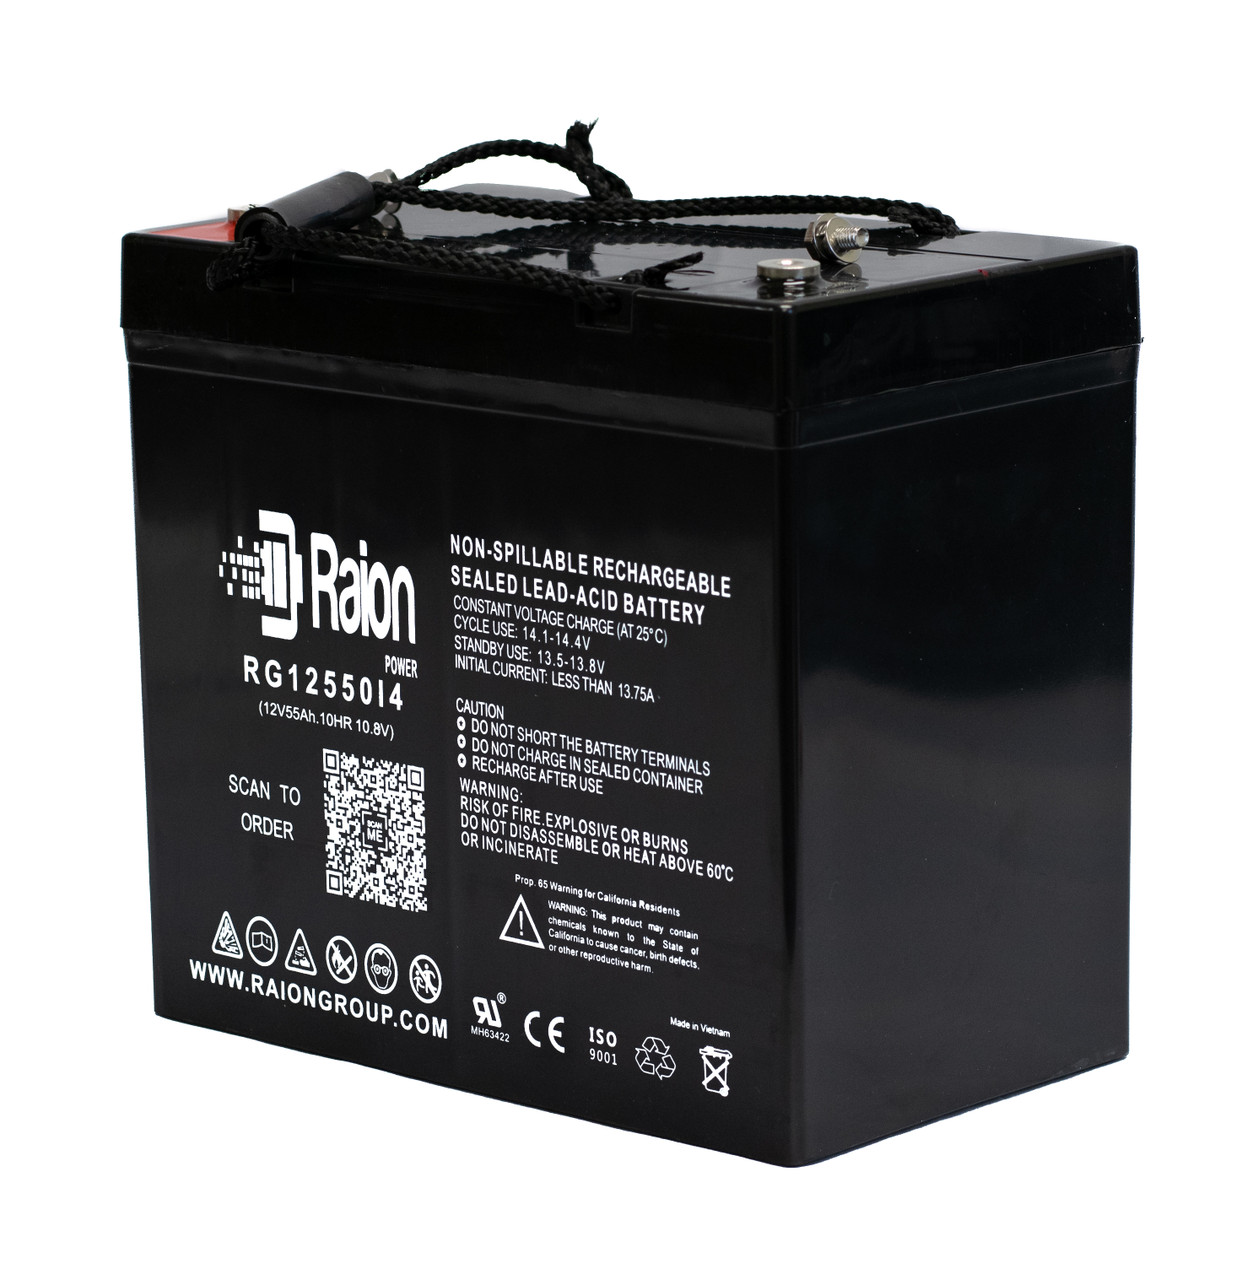 Raion Power Replacement 12V 55Ah Battery for Duramp NP55-12 - 1 Pack